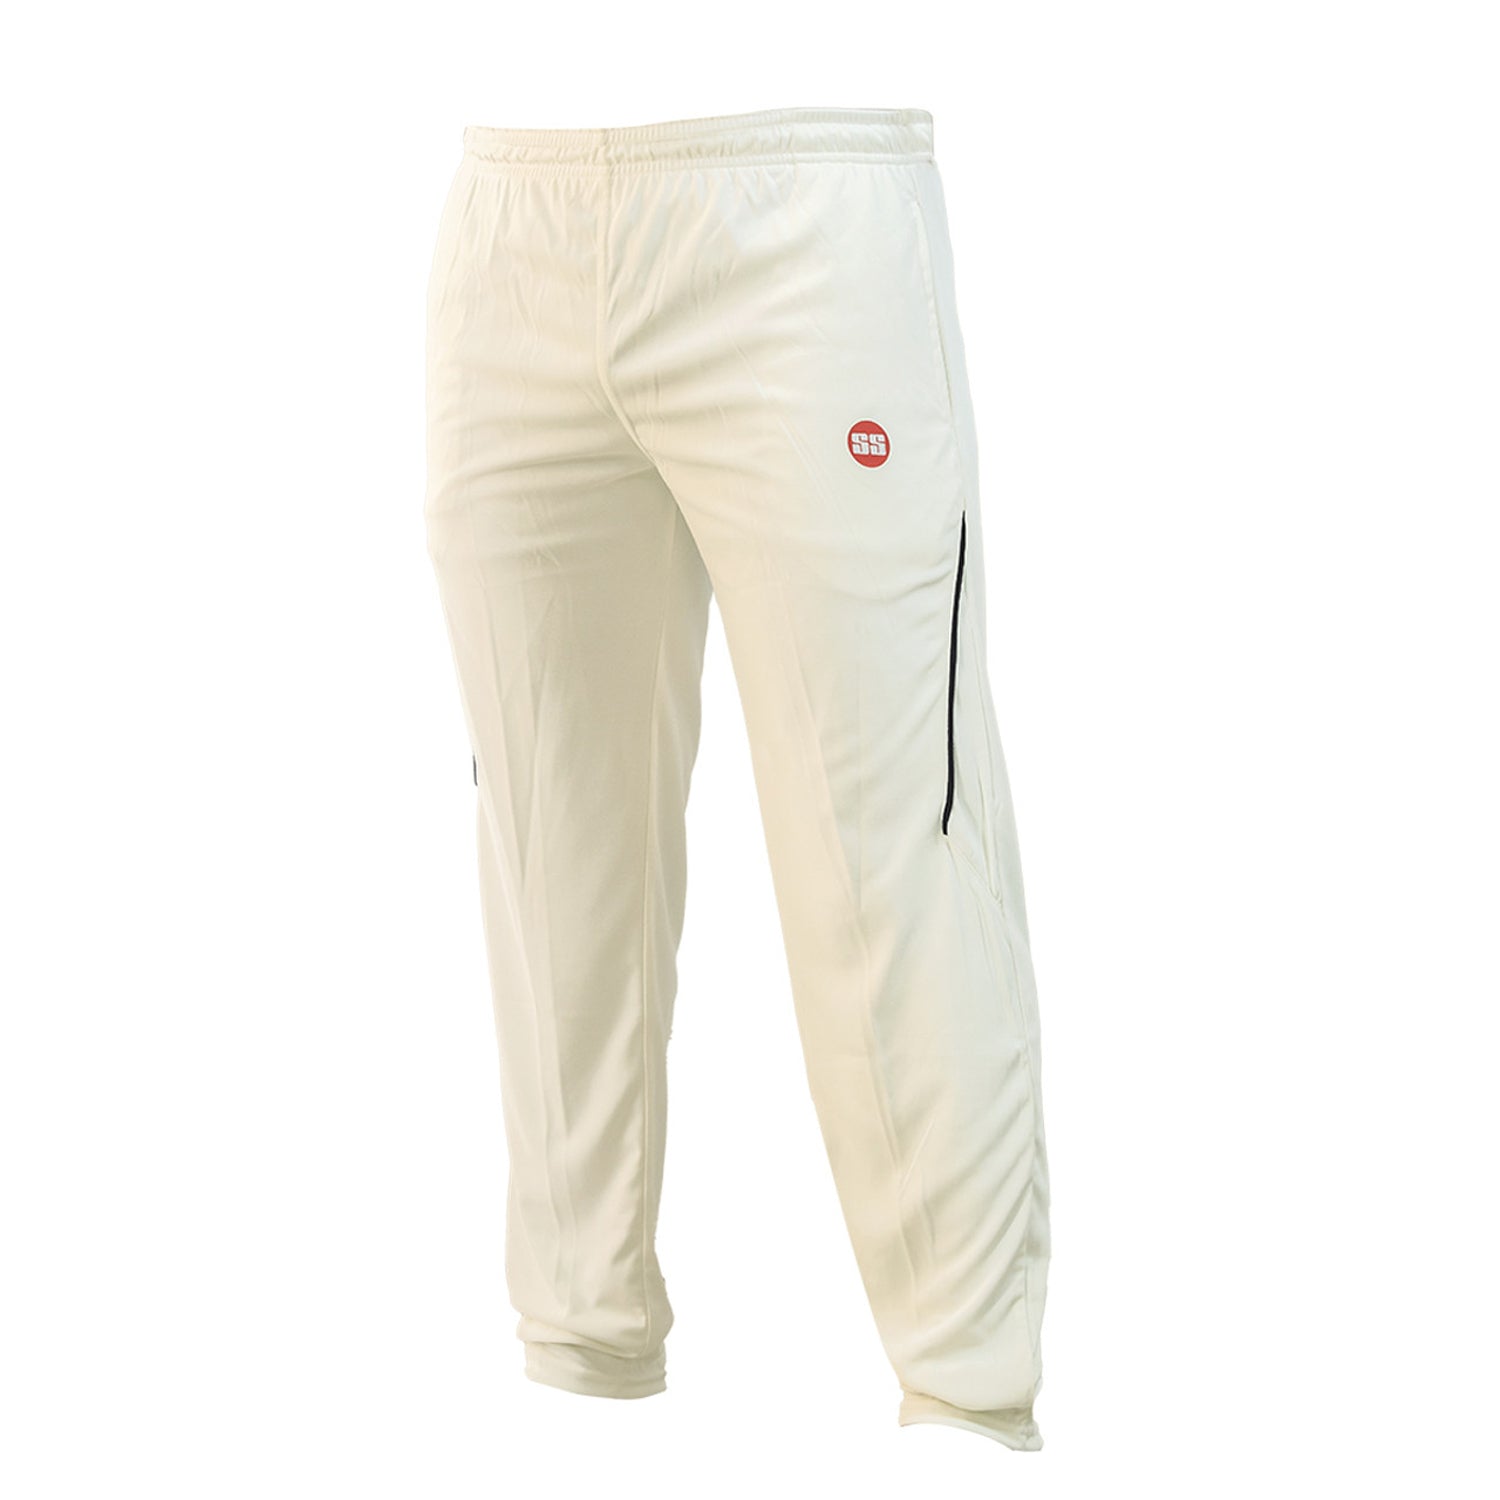  Gray Nicolls Matrix Slim Fit Cricket Trousers 2022  Next Day Delivery  